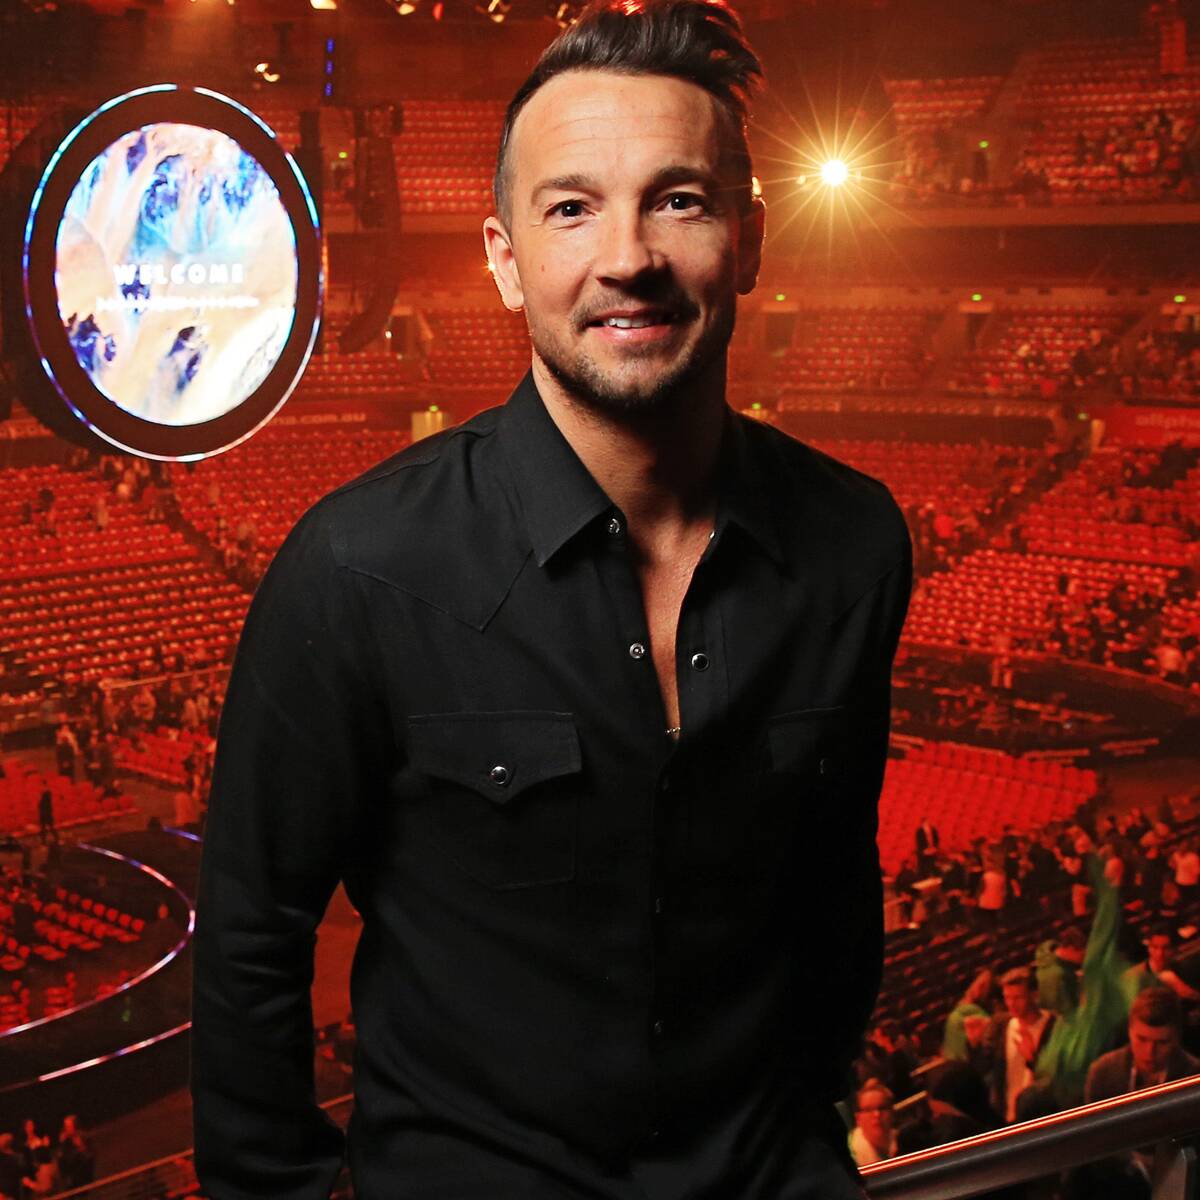 A Docuseries About the Hillsong Church & Fired Pastor Carl Lentz Is in the Works